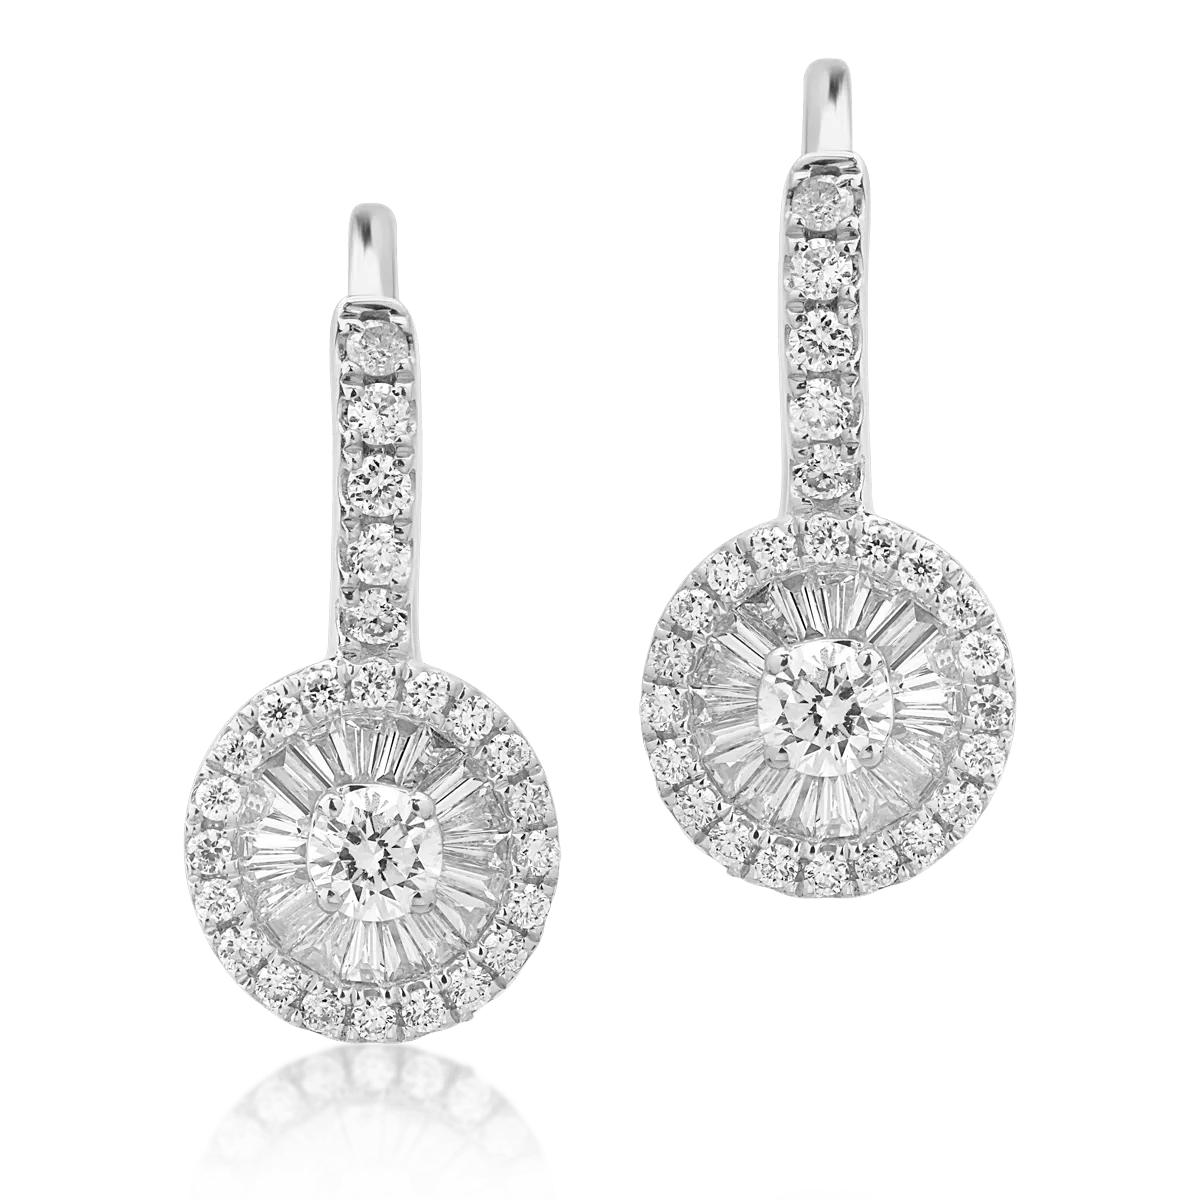 18K white gold earrings with 0.48ct diamonds